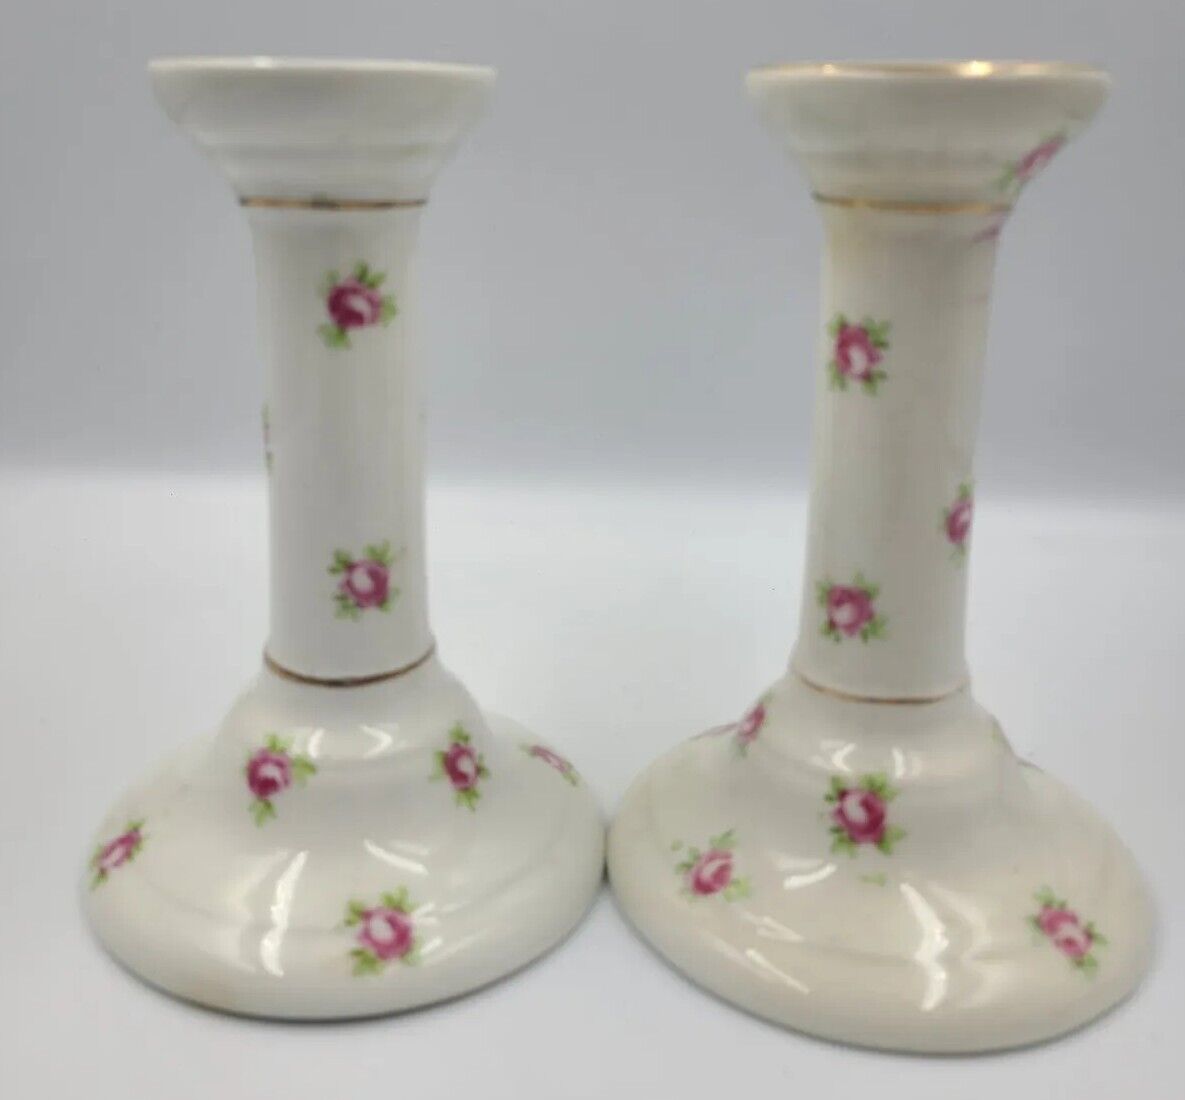 2- 1910’s ANTIQUE Empire Ware Roses PORCELAIN Candle Stick Holders 5.25”